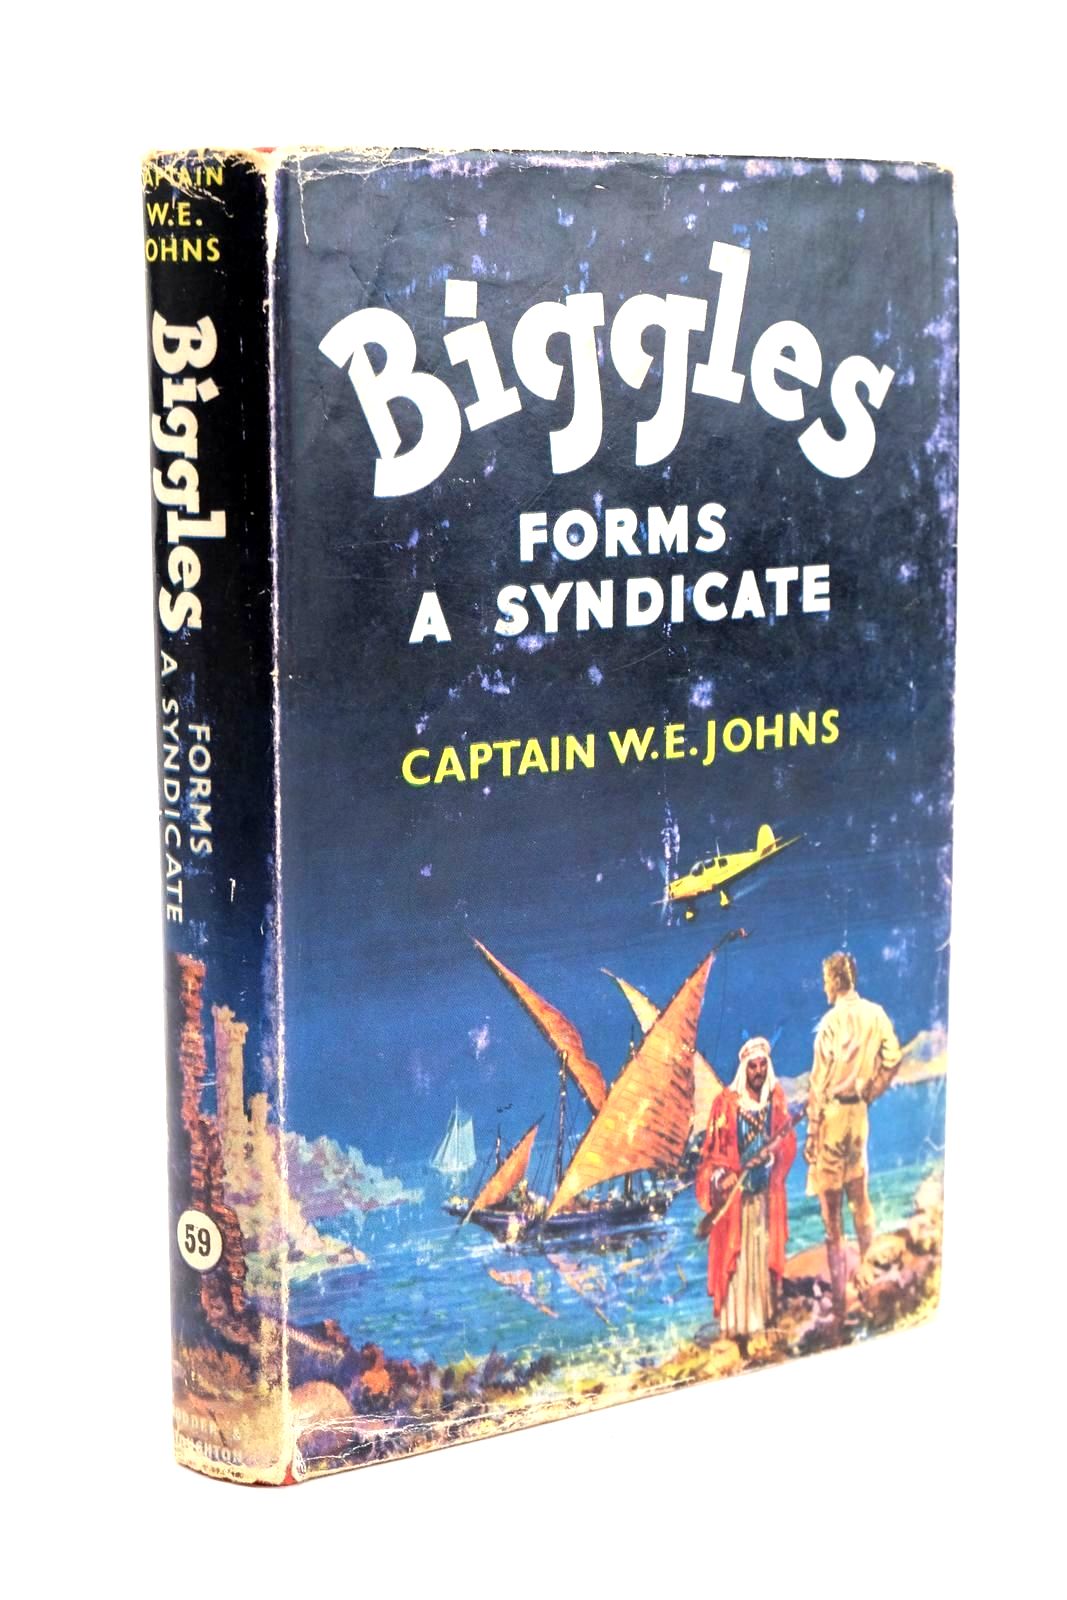 Photo of BIGGLES FORMS A SYNDICATE written by Johns, W.E. illustrated by Stead,  published by Hodder & Stoughton (STOCK CODE: 1324362)  for sale by Stella & Rose's Books